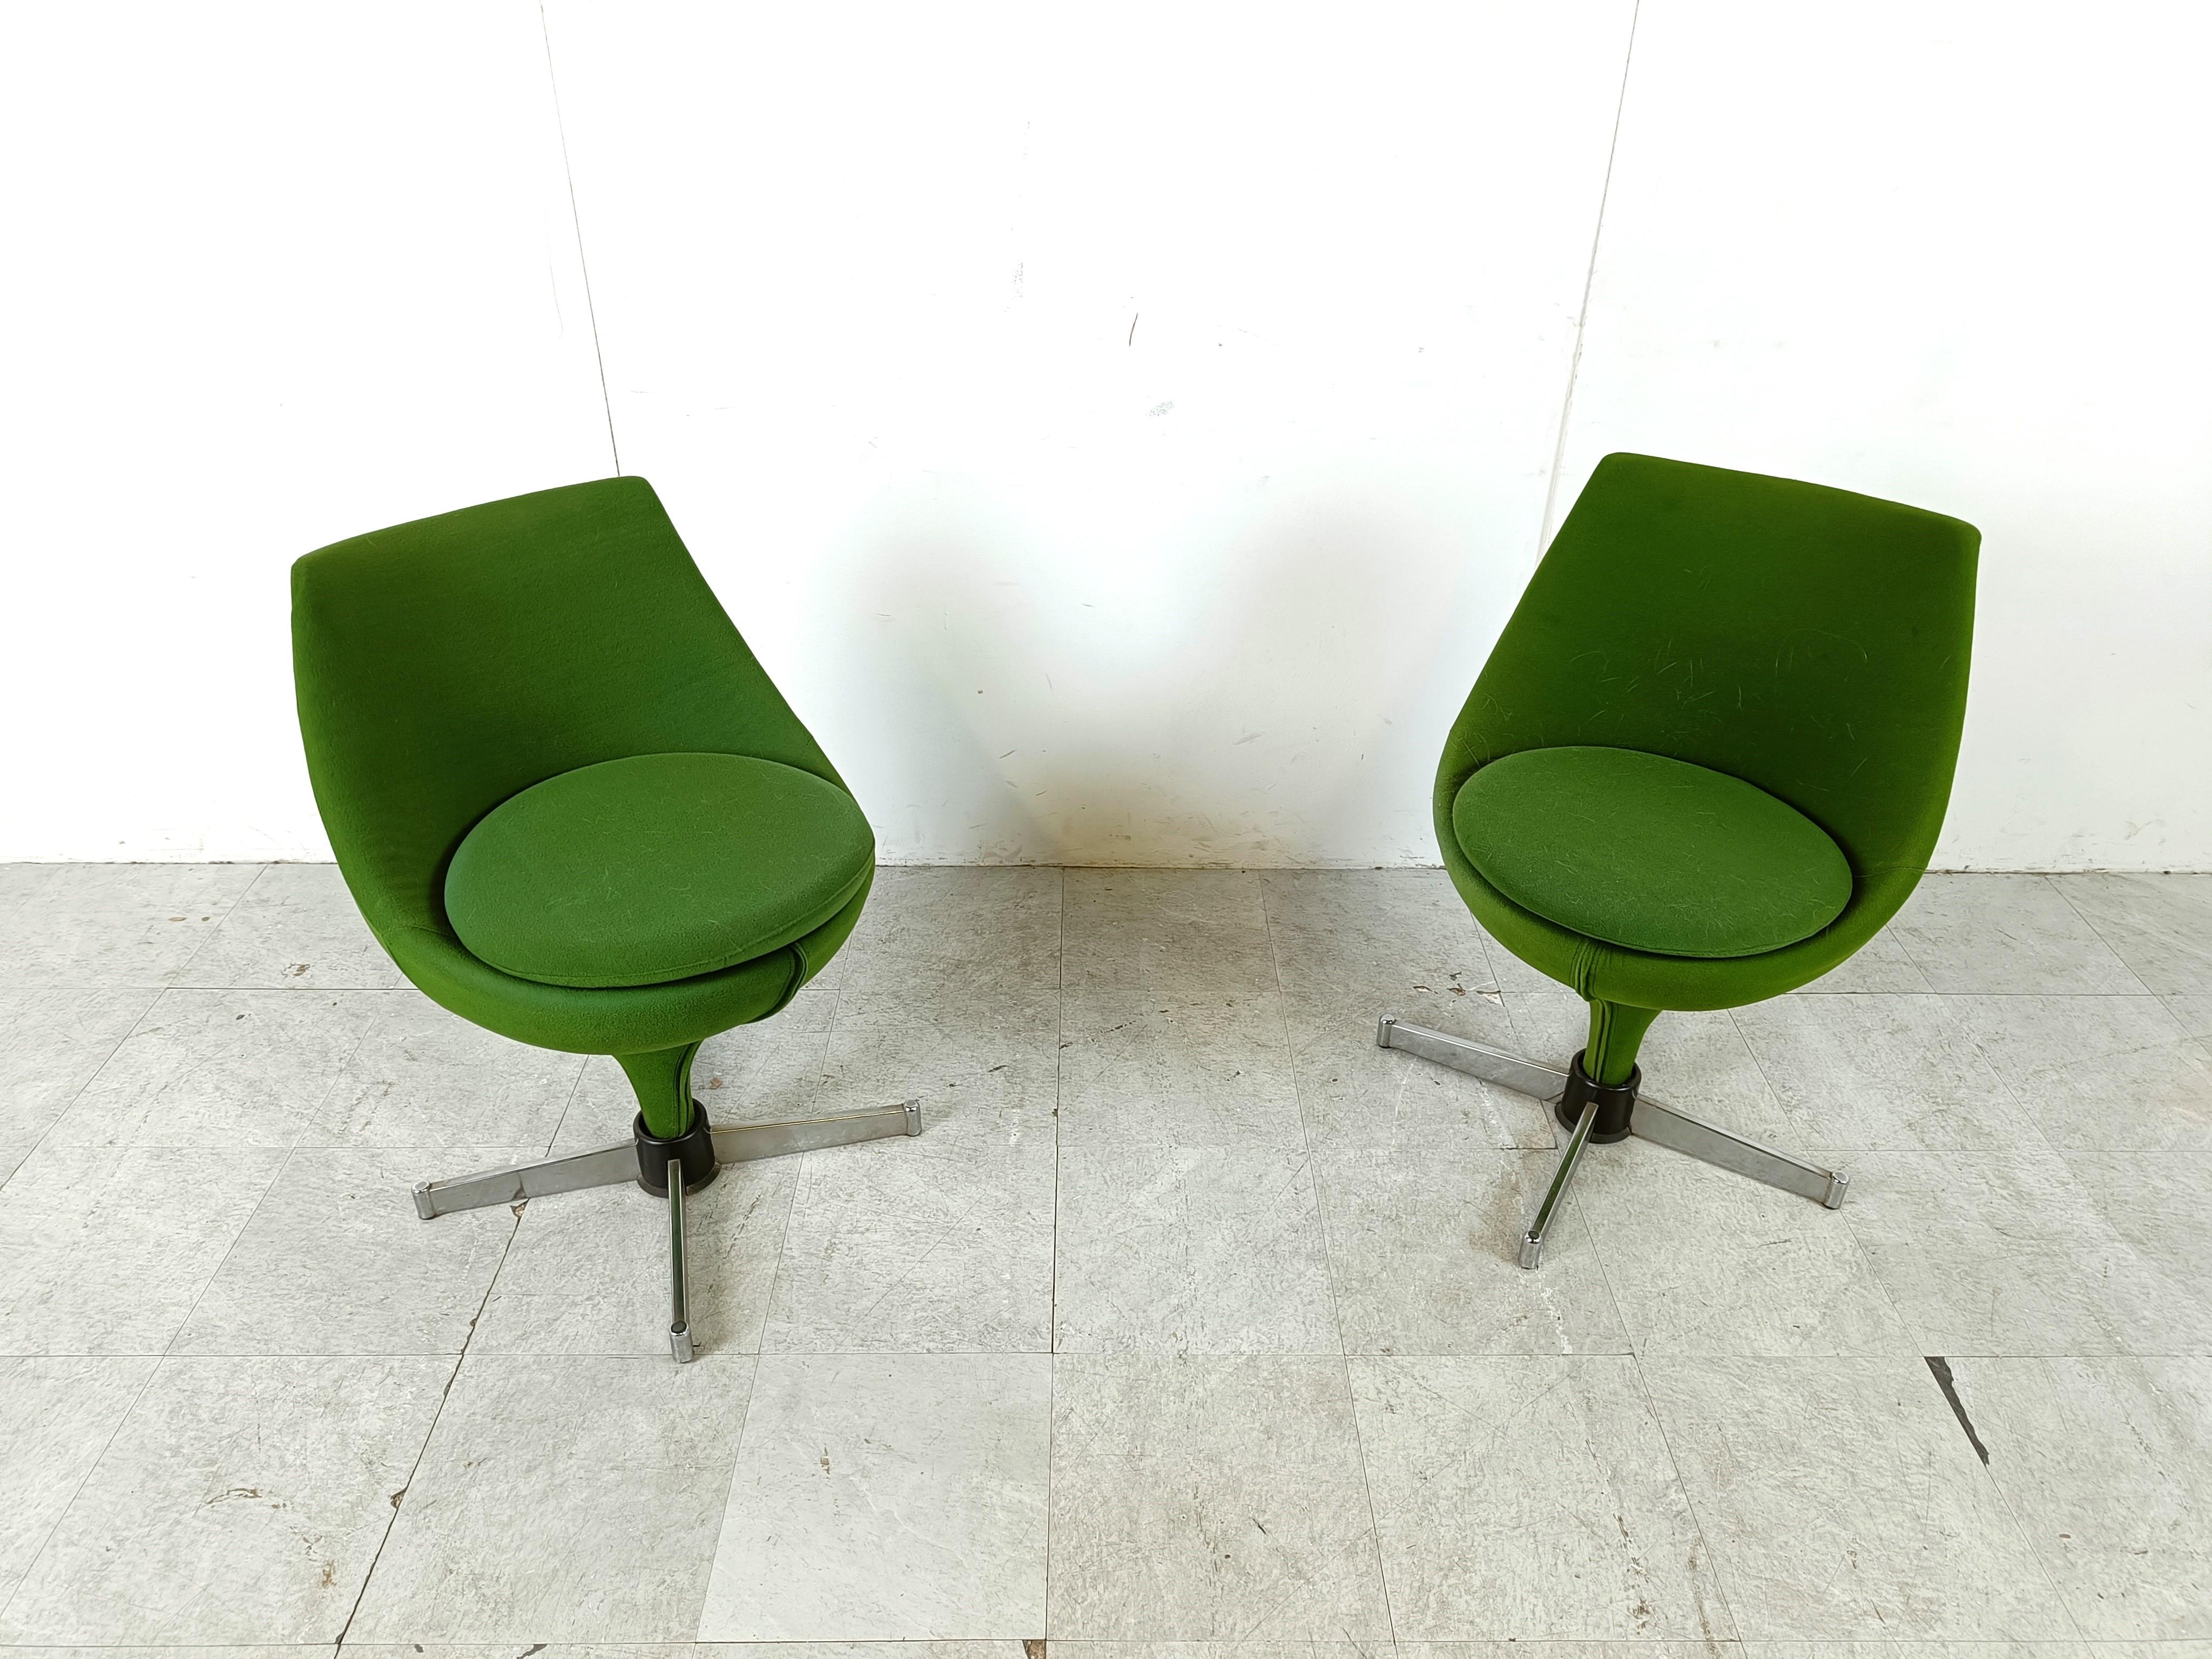 Pair of mid century swivel chairs model 'Polaris' designed by Pierre Guariche for Meurop.

The chairs have a metal base and green original fabric upholstery.

Good condition.

Beautiful timeless design.

1960s- France/Belgium

Dimensions:
Height: